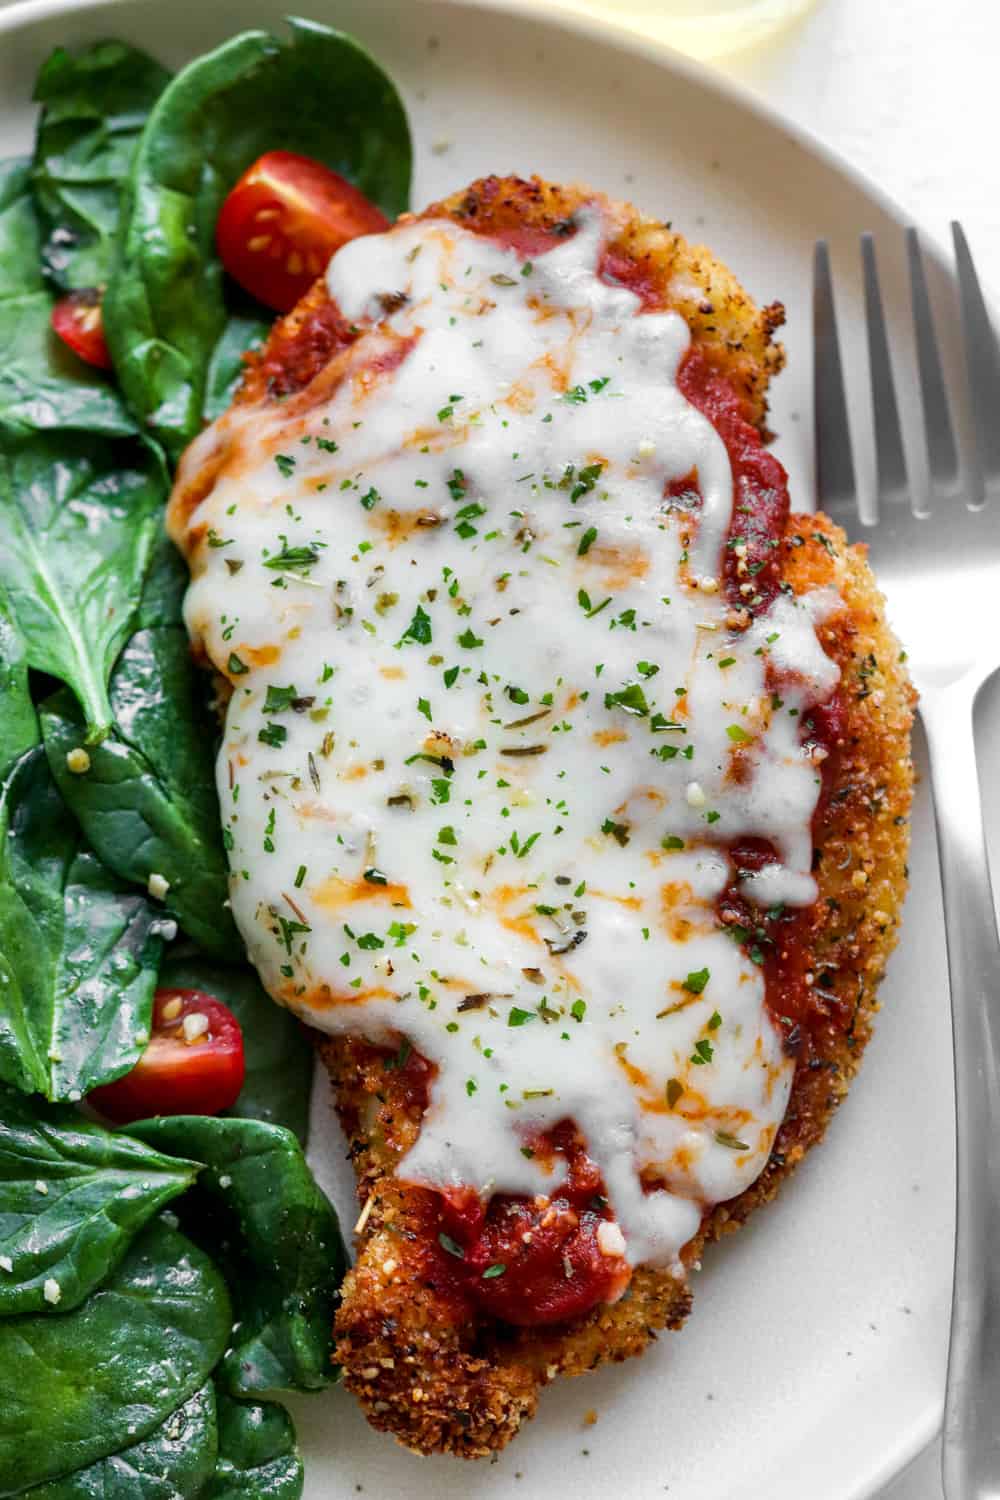 Healthy breaded chicken parmesan on a white plate with spinach and tomato salad next to it and a silver fork on the the plate